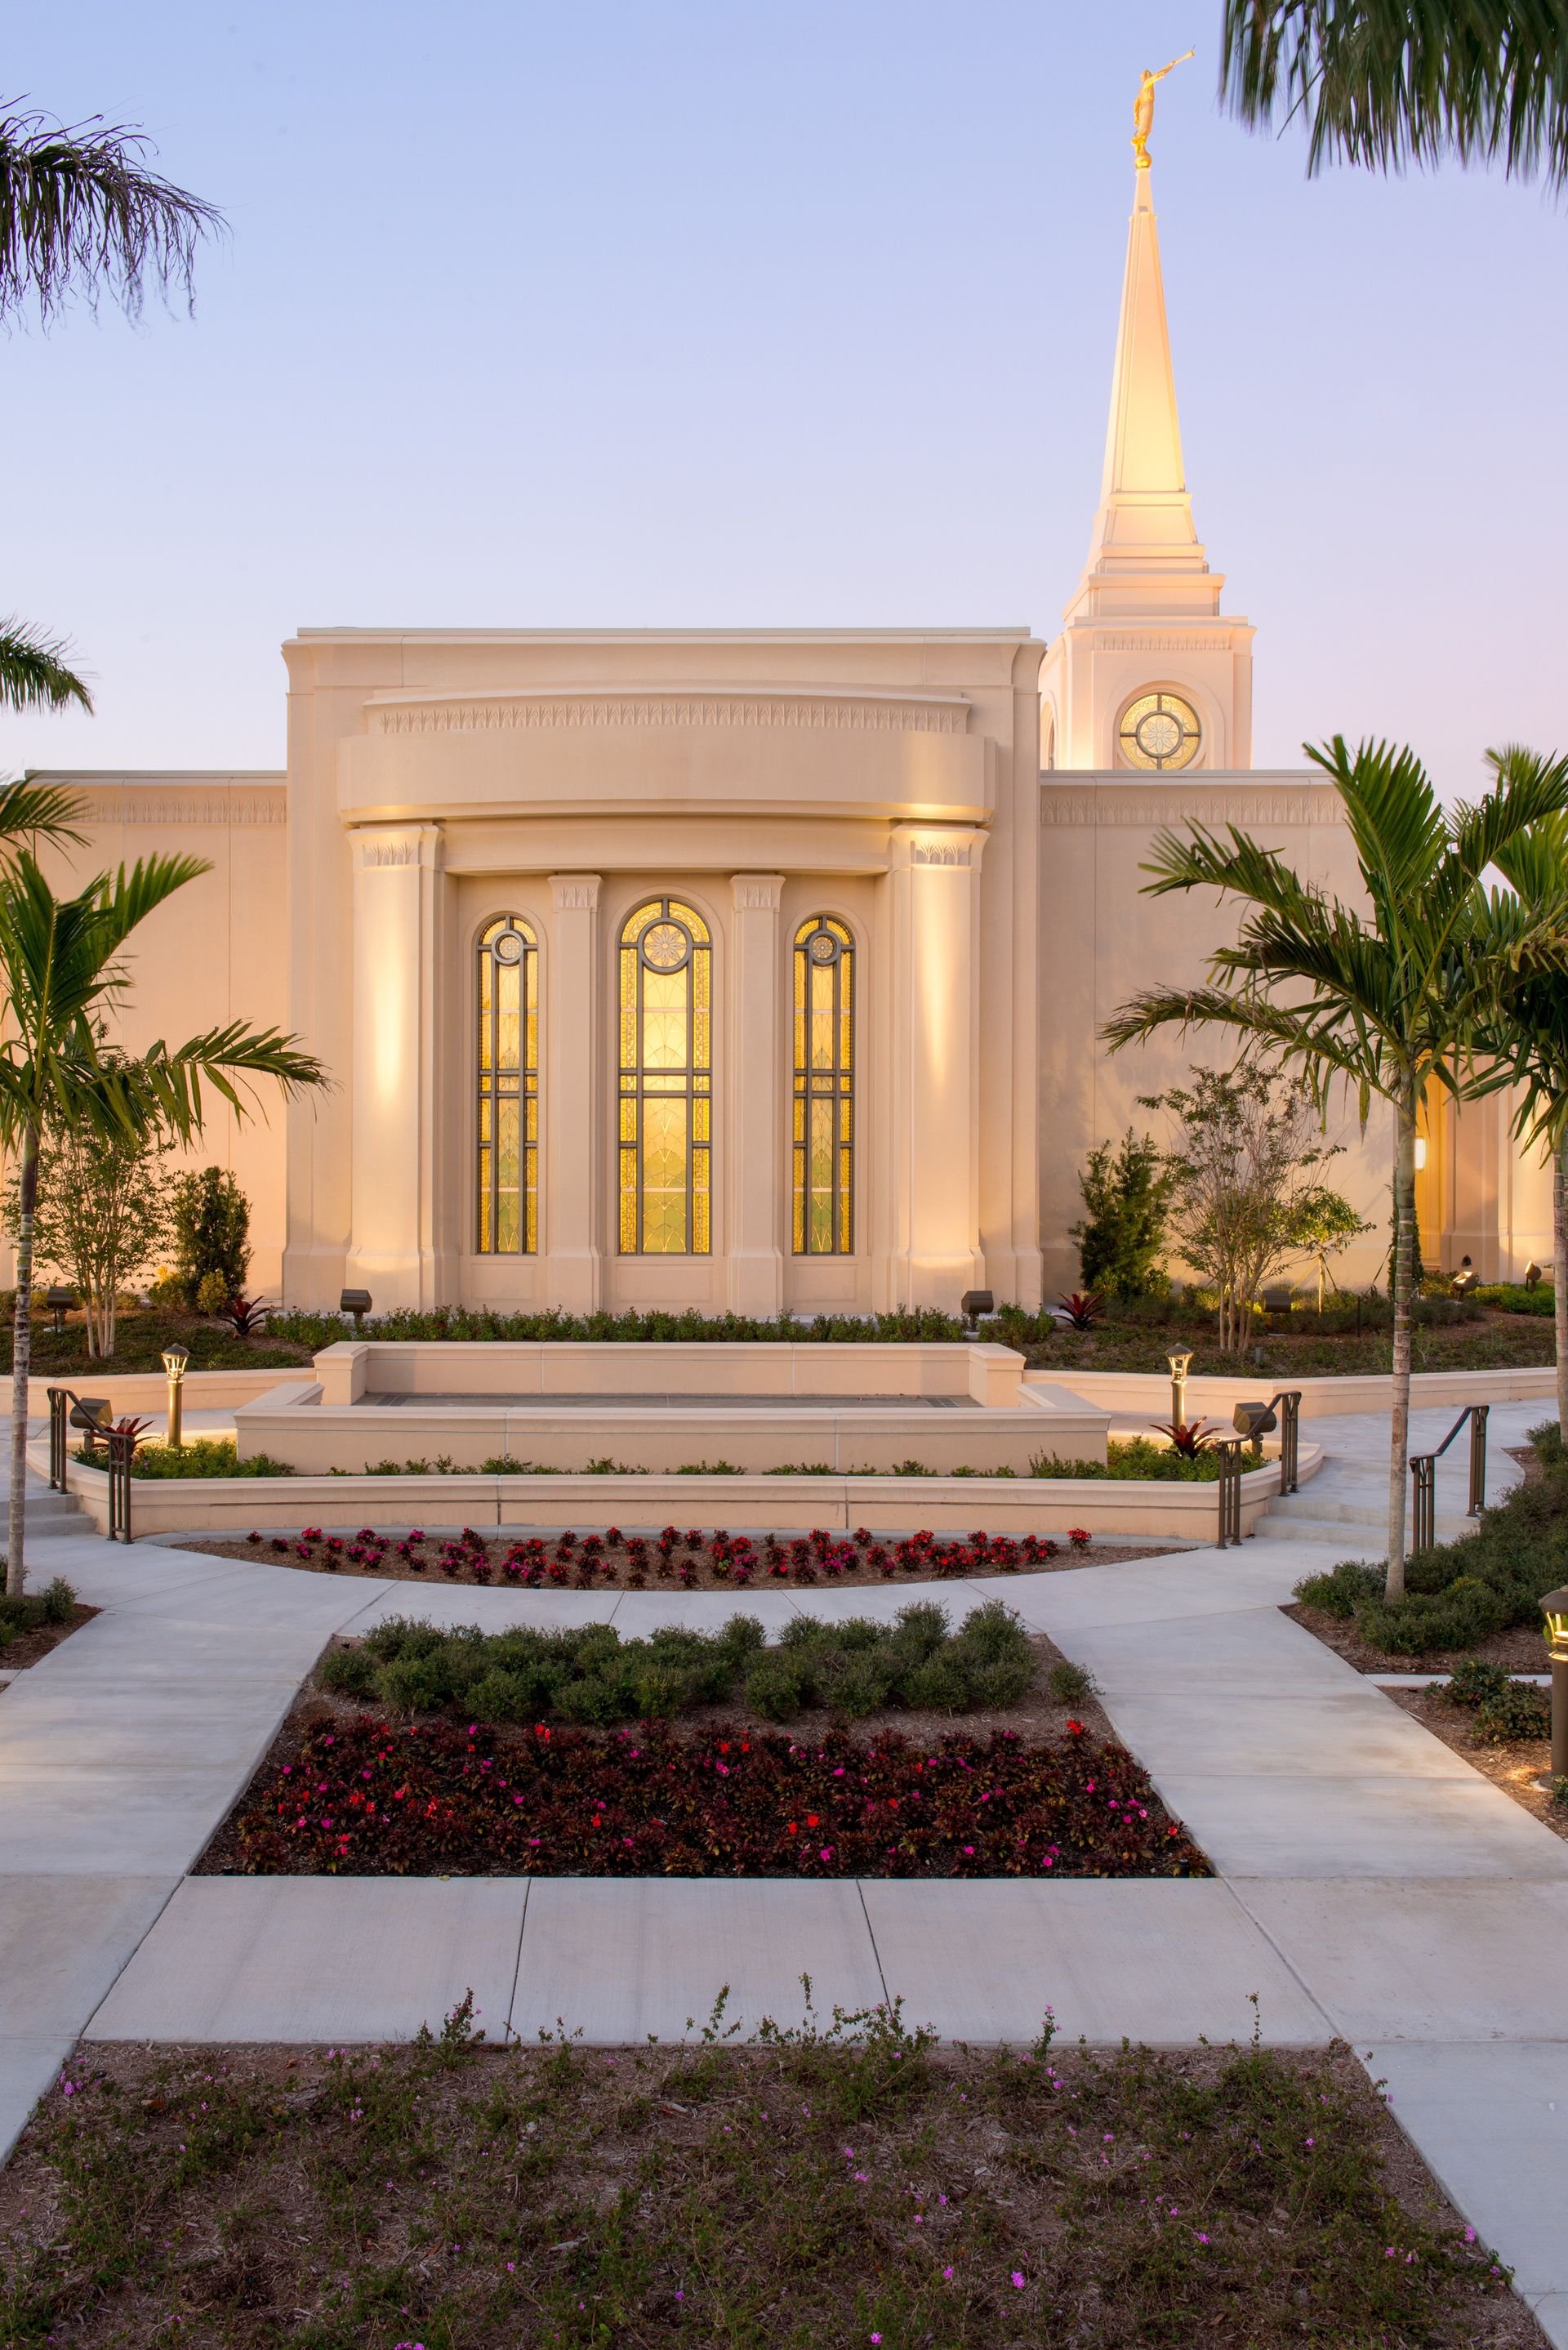 The windows of the Fort Lauderdale Florida Temple lit up at night.